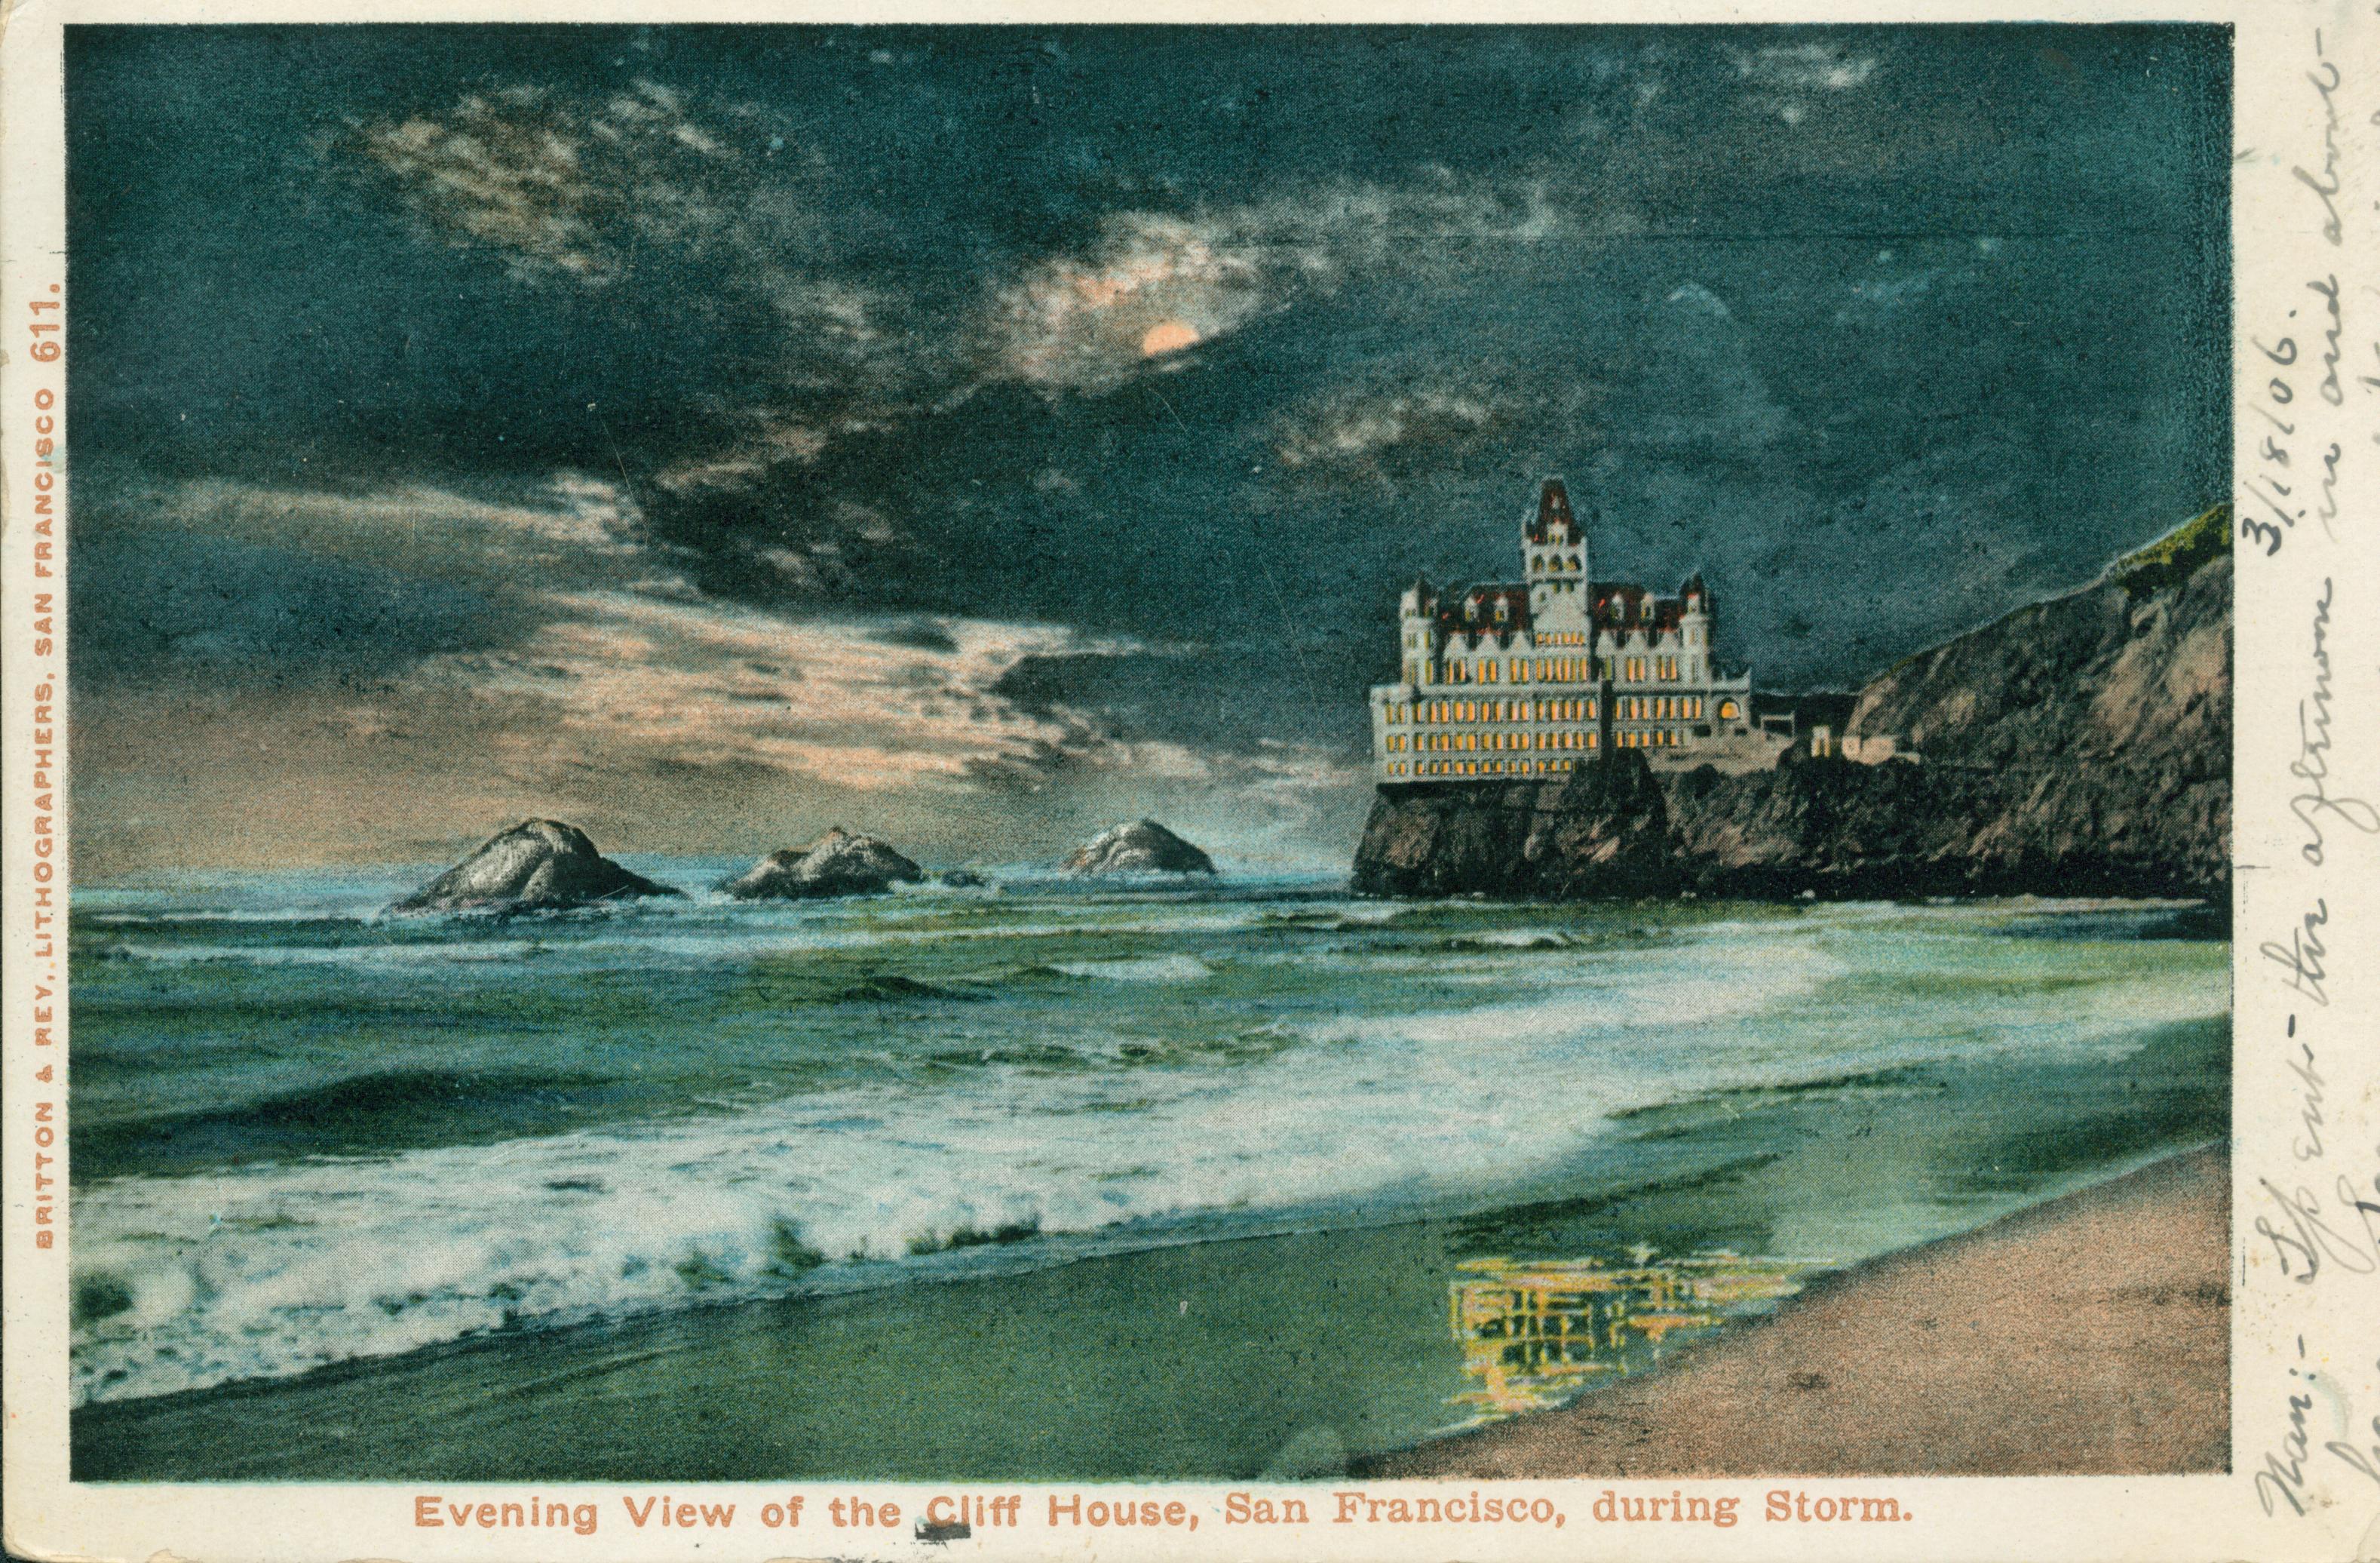 Shows the Cliff House and Seal Rocks at night with the beach in the foreground.